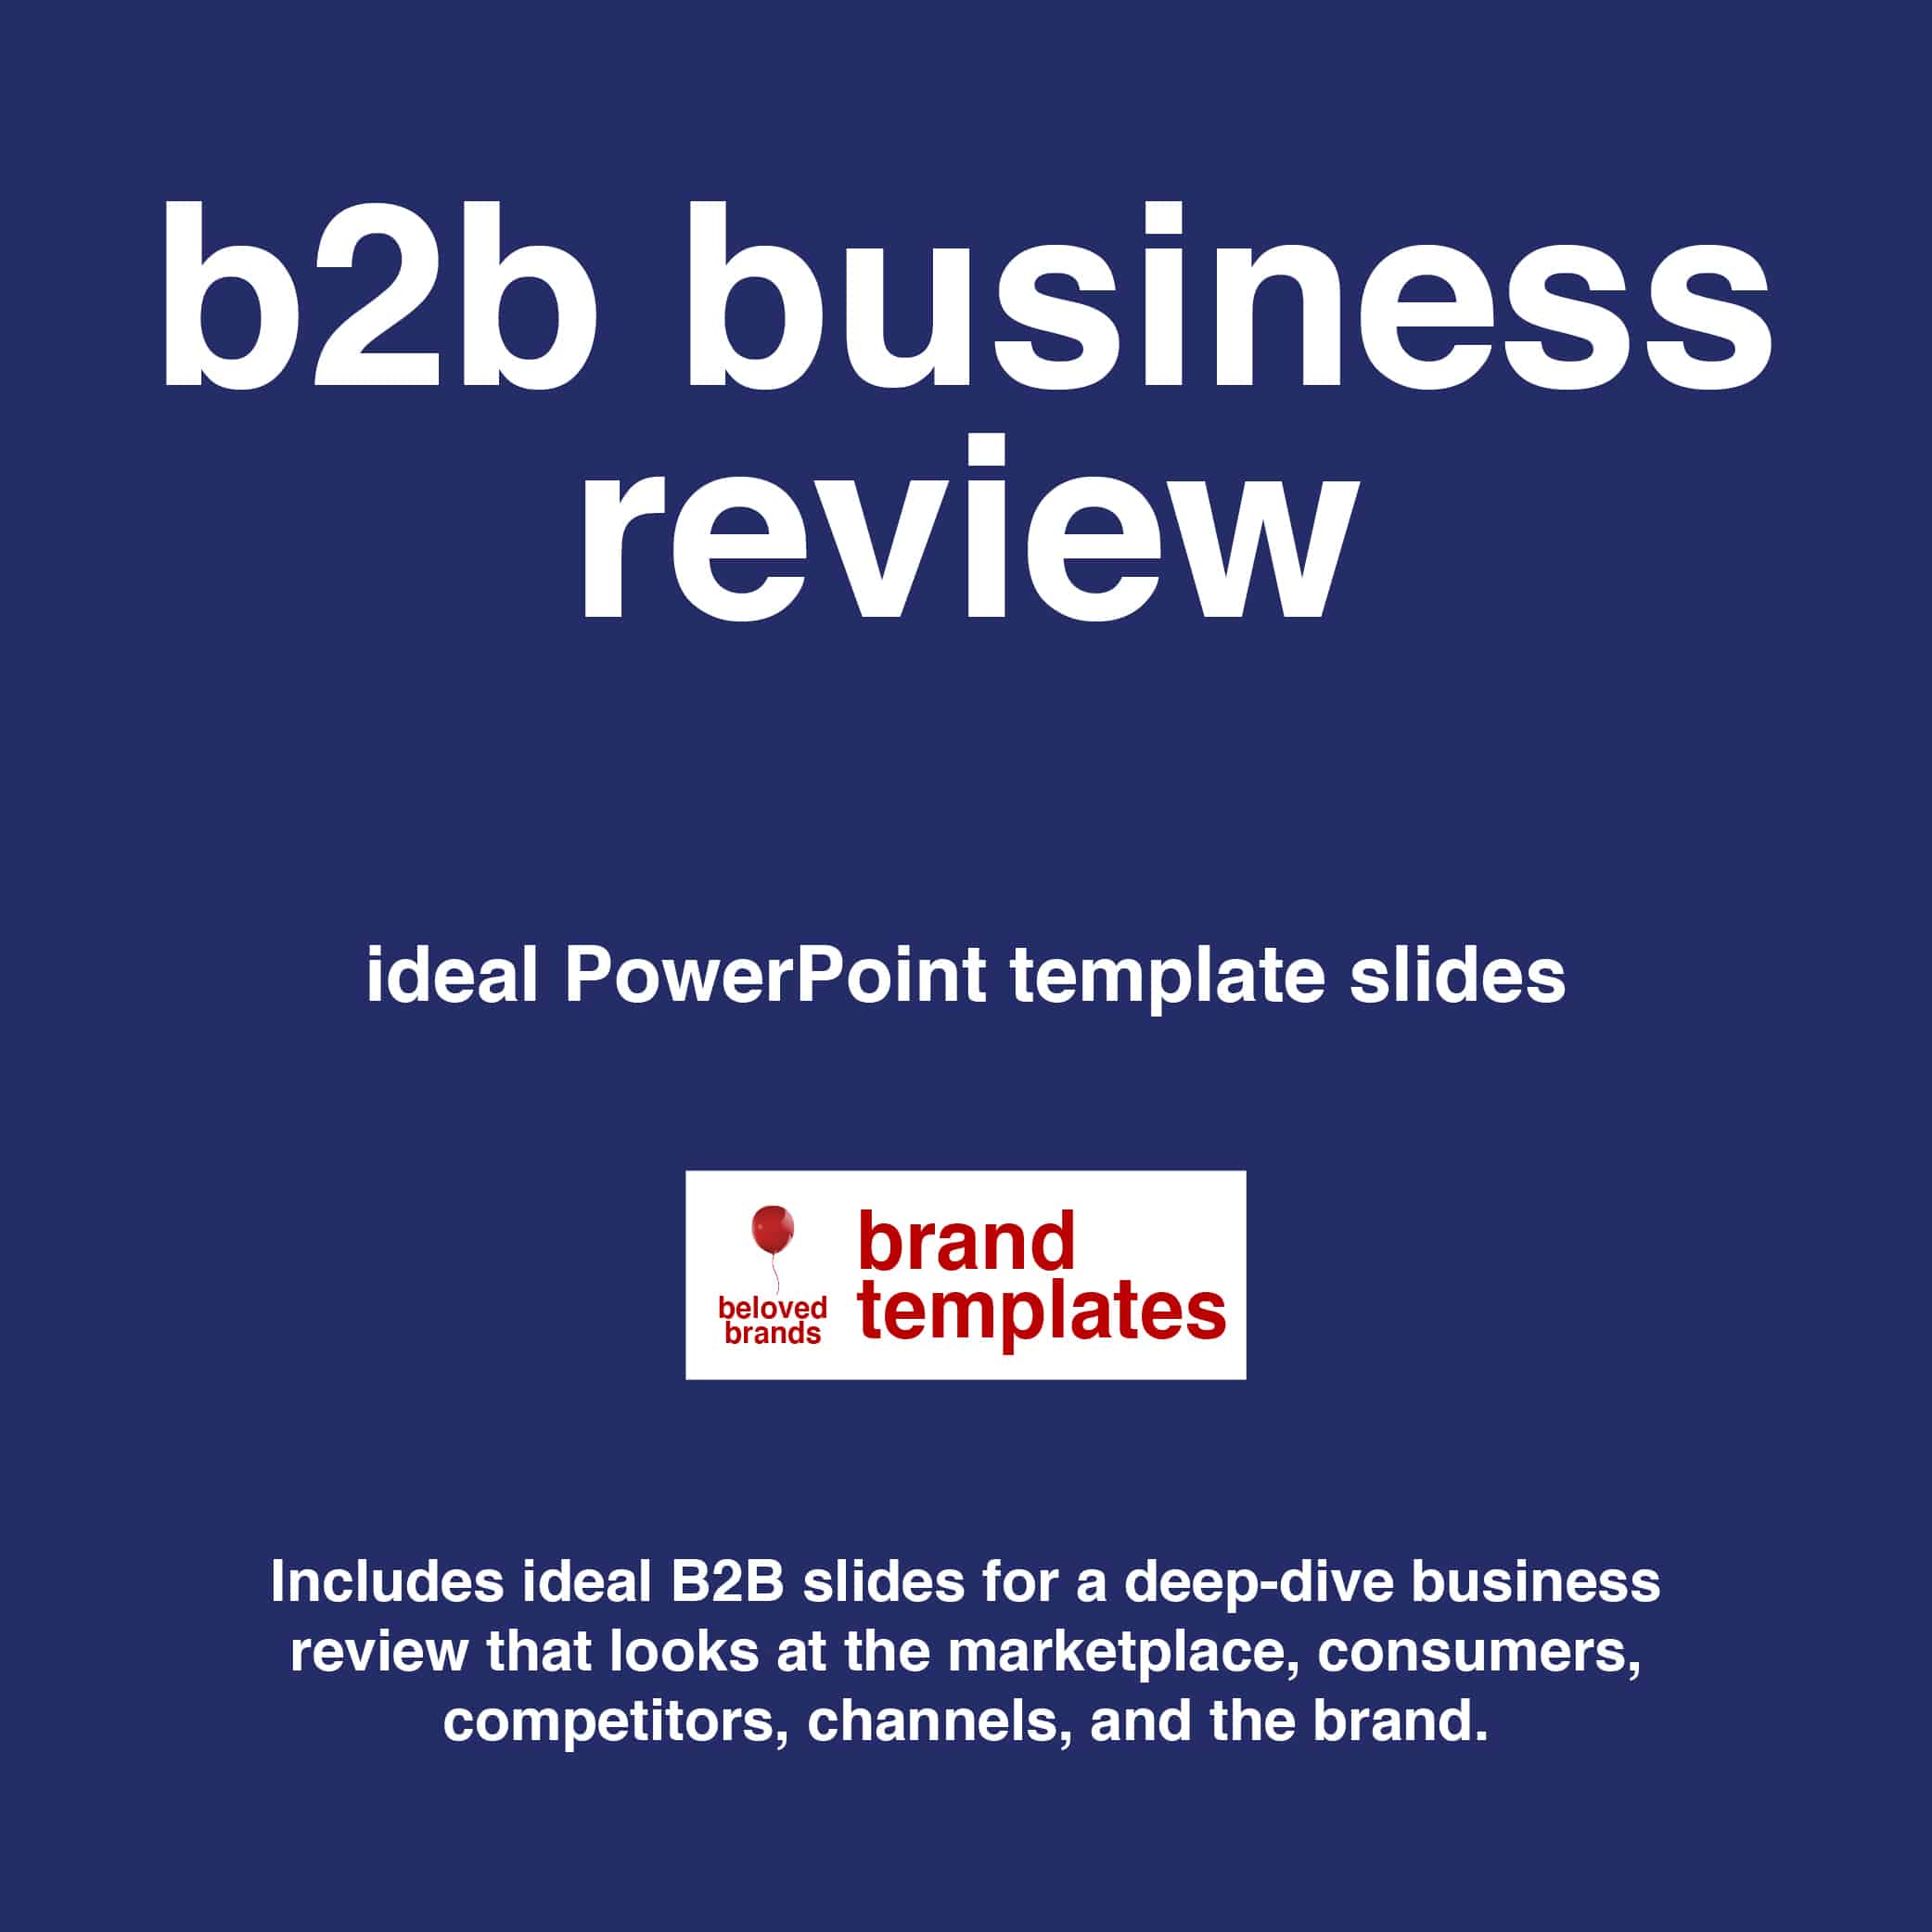 b2b business review template